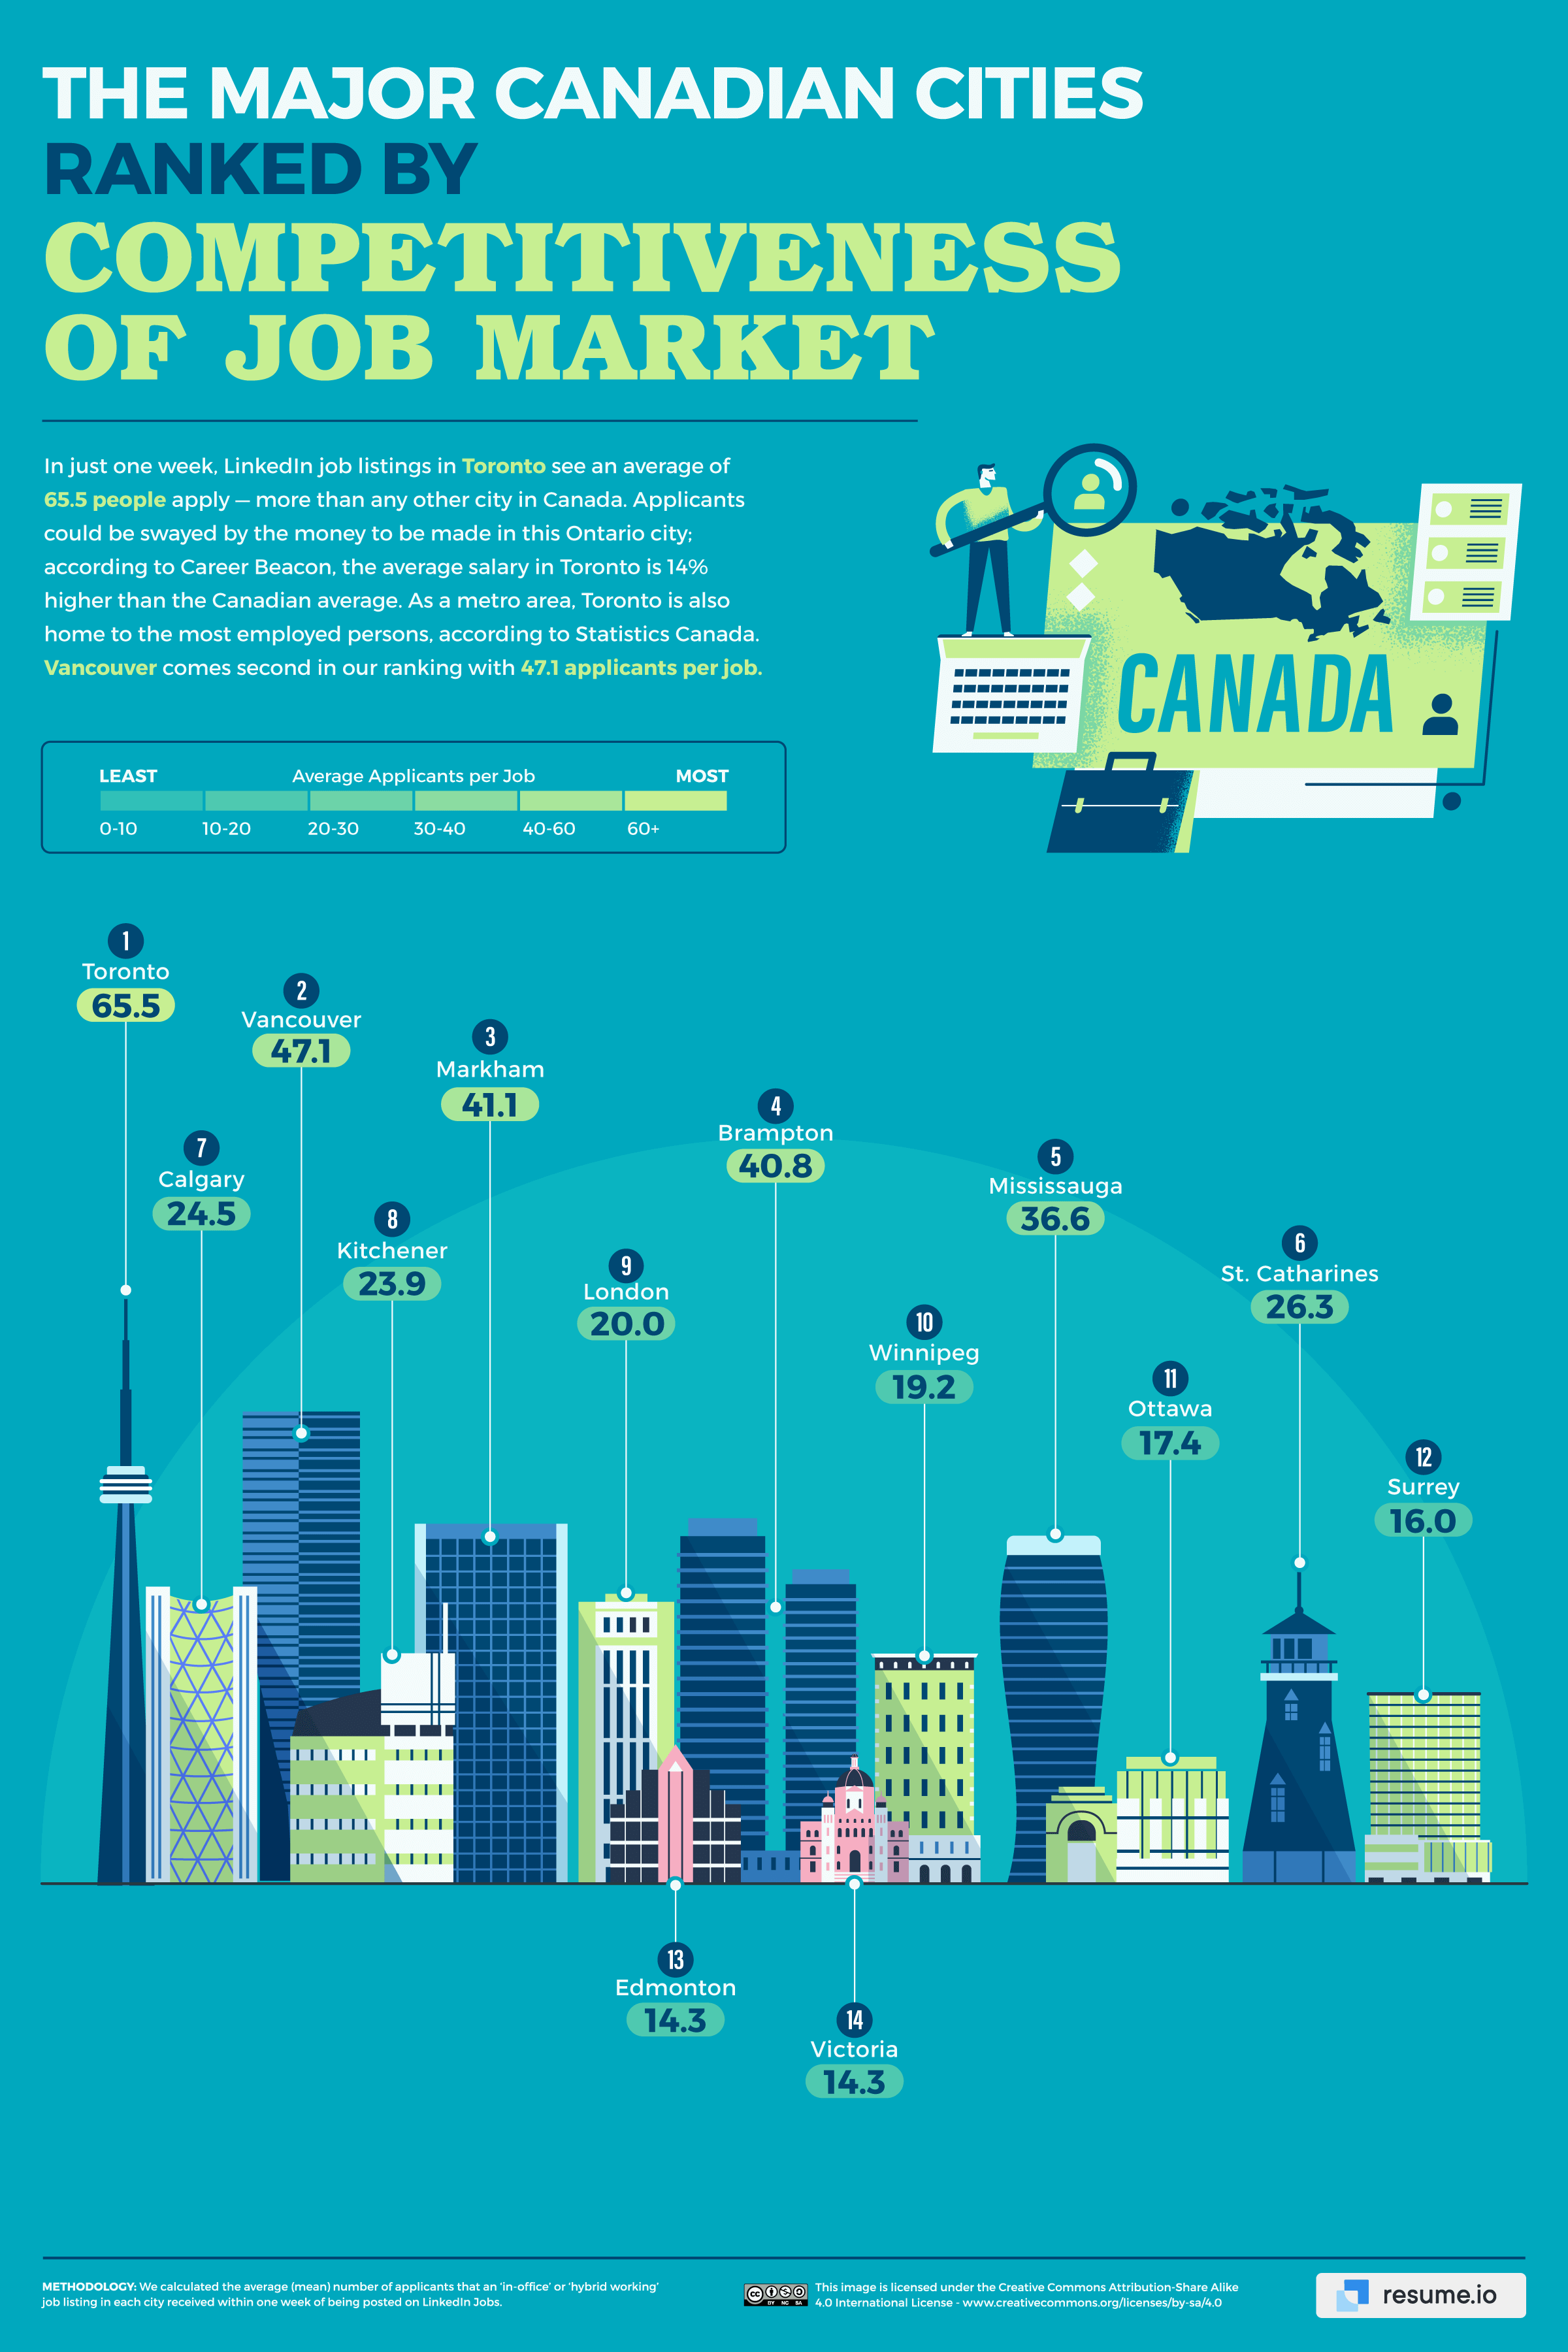 Ranking of job market competitiveness among the major Canadian cities